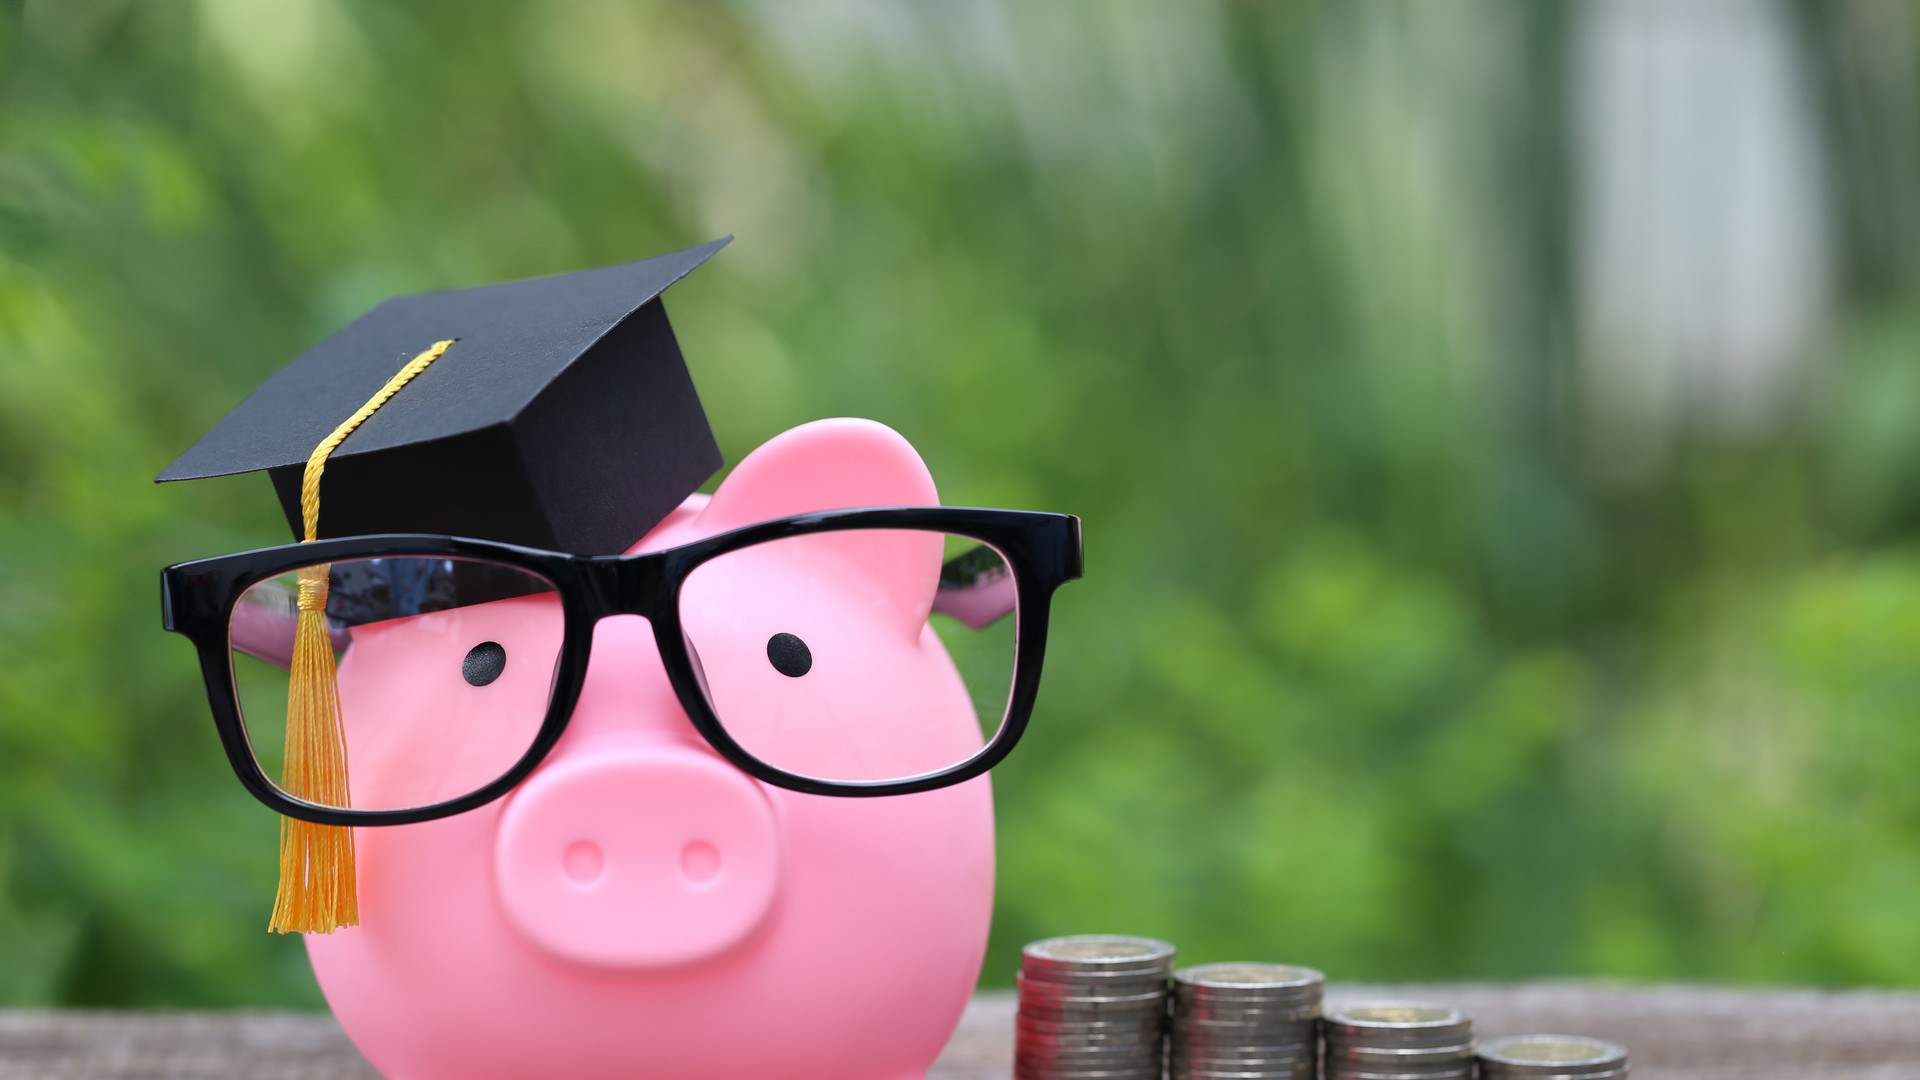 Graduation hat on pink piggy bank with stack of coins money on nature green background, Saving money for education concept